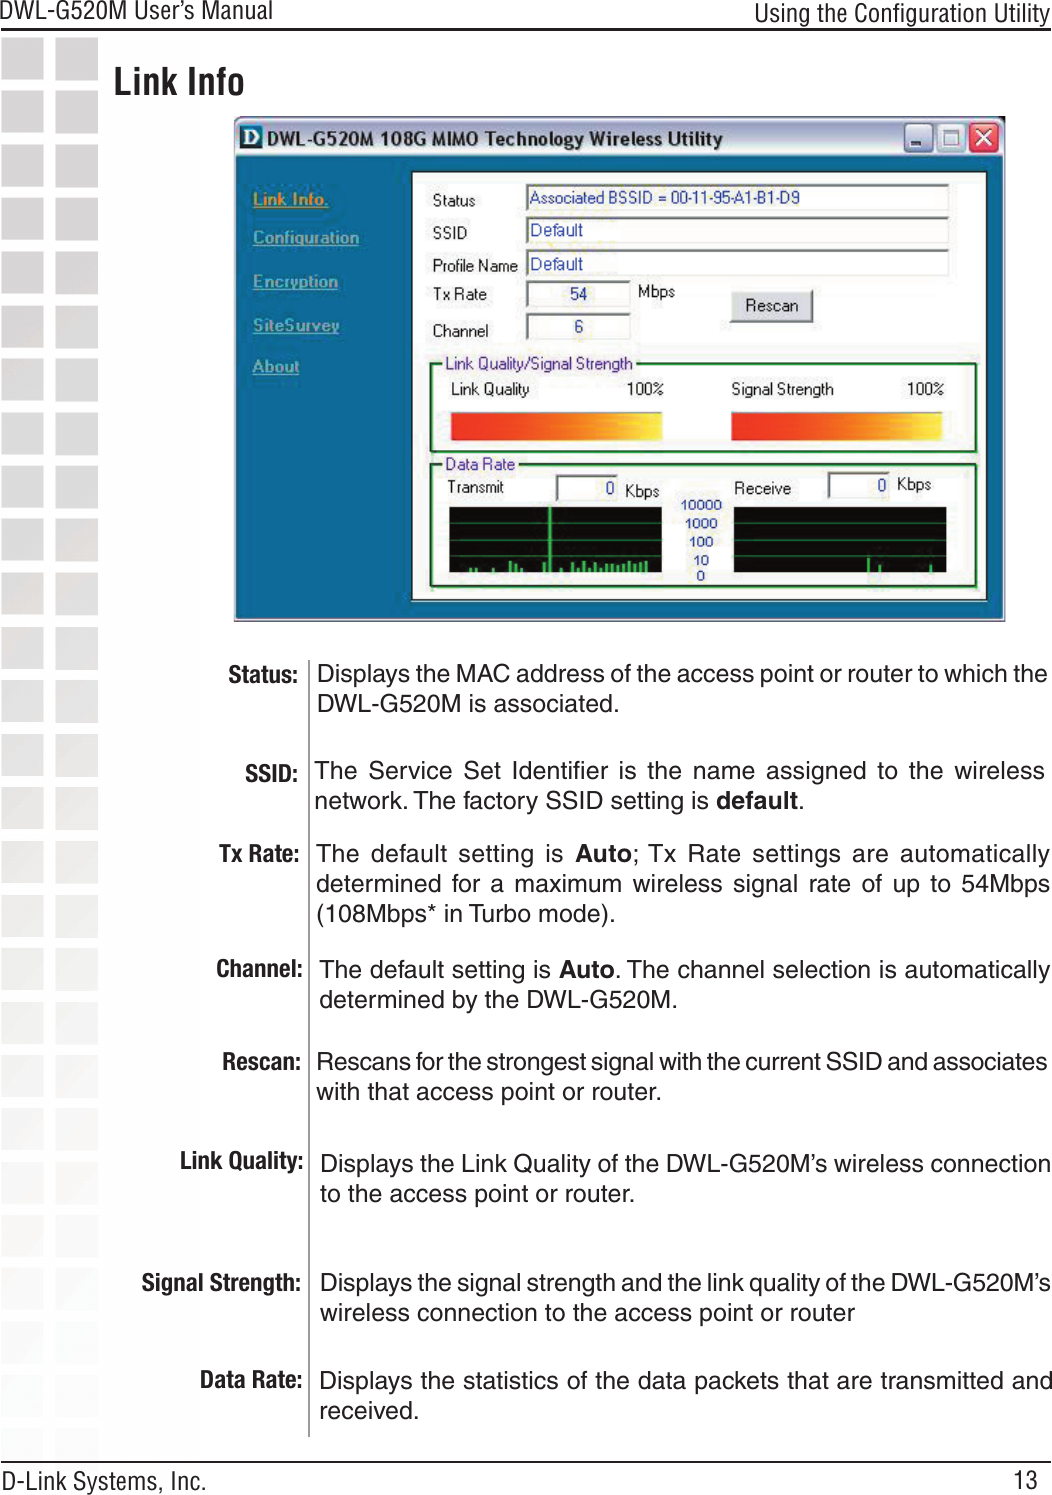 13DWL-G520M User’s Manual D-Link Systems, Inc.Using the Conﬁguration UtilityStatus:SSID: Displays the MAC address of the access point or router to which the                   DWL-G520M is associated.The  Service  Set  Identiﬁer  is  the  name  assigned  to  the  wireless network. The factory SSID setting is default. Tx Rate:  The  default  setting  is  Auto; Tx  Rate  settings  are  automatically determined  for  a  maximum  wireless  signal  rate  of  up  to  54Mbps (108Mbps* in Turbo mode).Channel:  The default setting is Auto. The channel selection is automatically determined by the DWL-G520M.Link InfoRescan: Rescans for the strongest signal with the current SSID and associates with that access point or router.Link Quality:  Displays the Link Quality of the DWL-G520M’s wireless connection to the access point or router.Signal Strength:  Displays the signal strength and the link quality of the DWL-G520M’s wireless connection to the access point or routerData Rate:  Displays the statistics of the data packets that are transmitted and received.